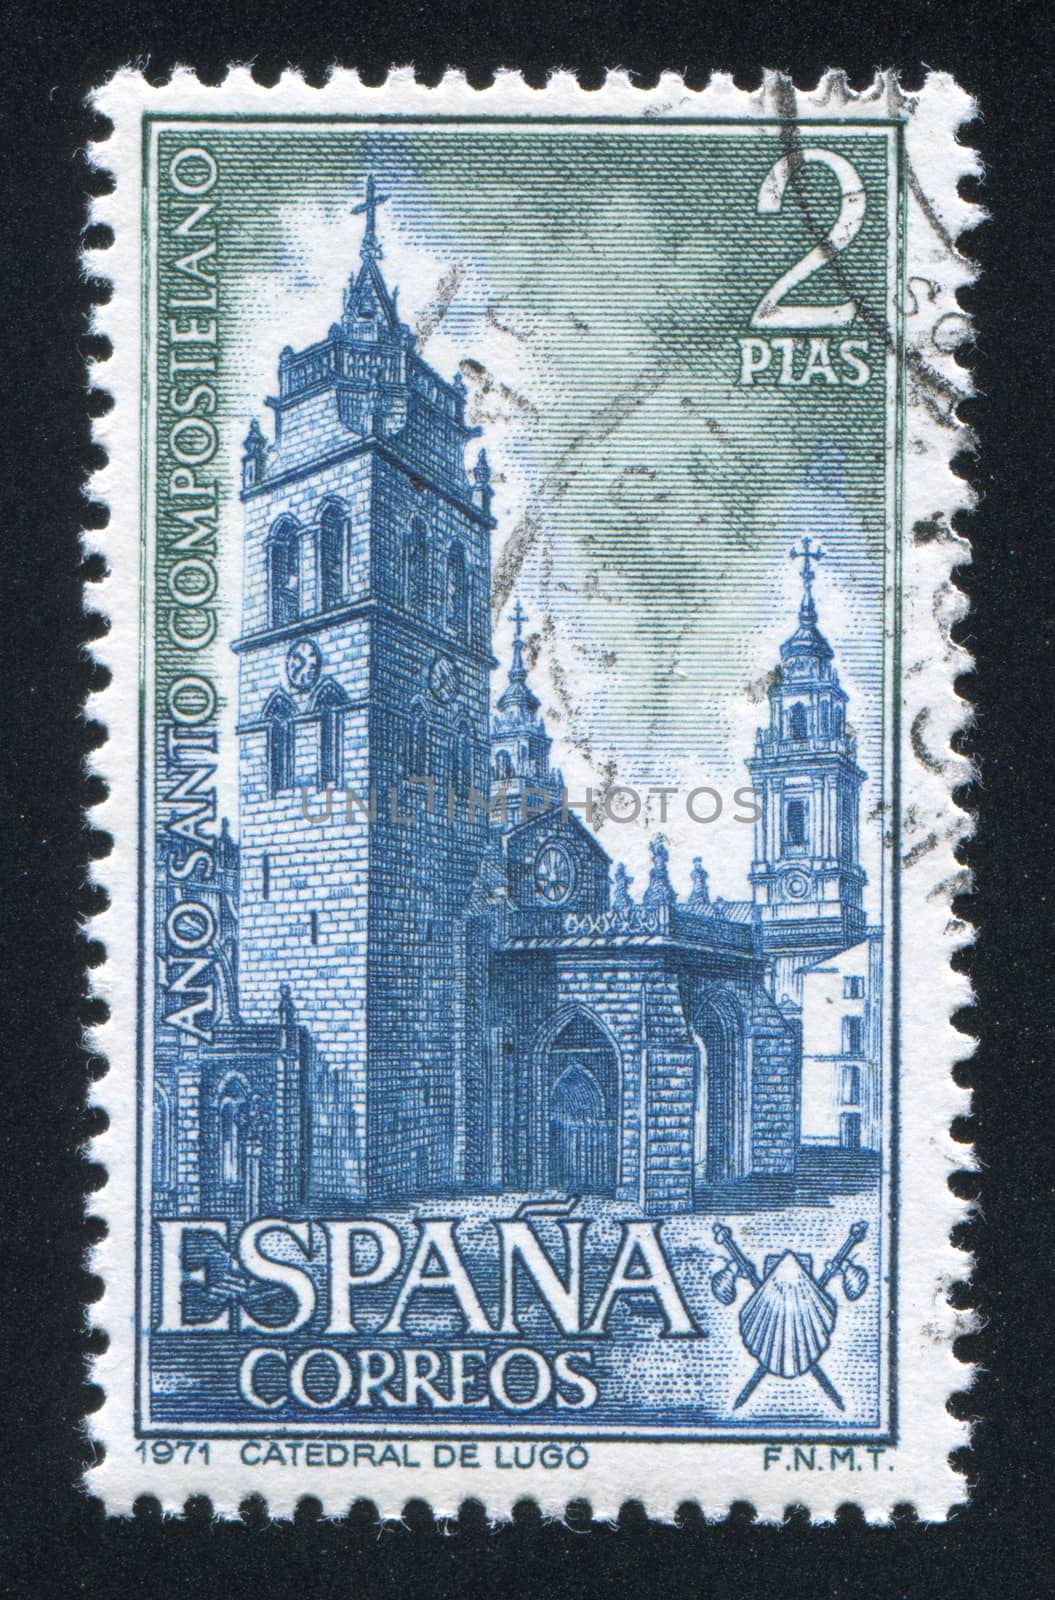 SPAIN - CIRCA 1971: stamp printed by Spain, shows Lugo Cathedral, circa 1971